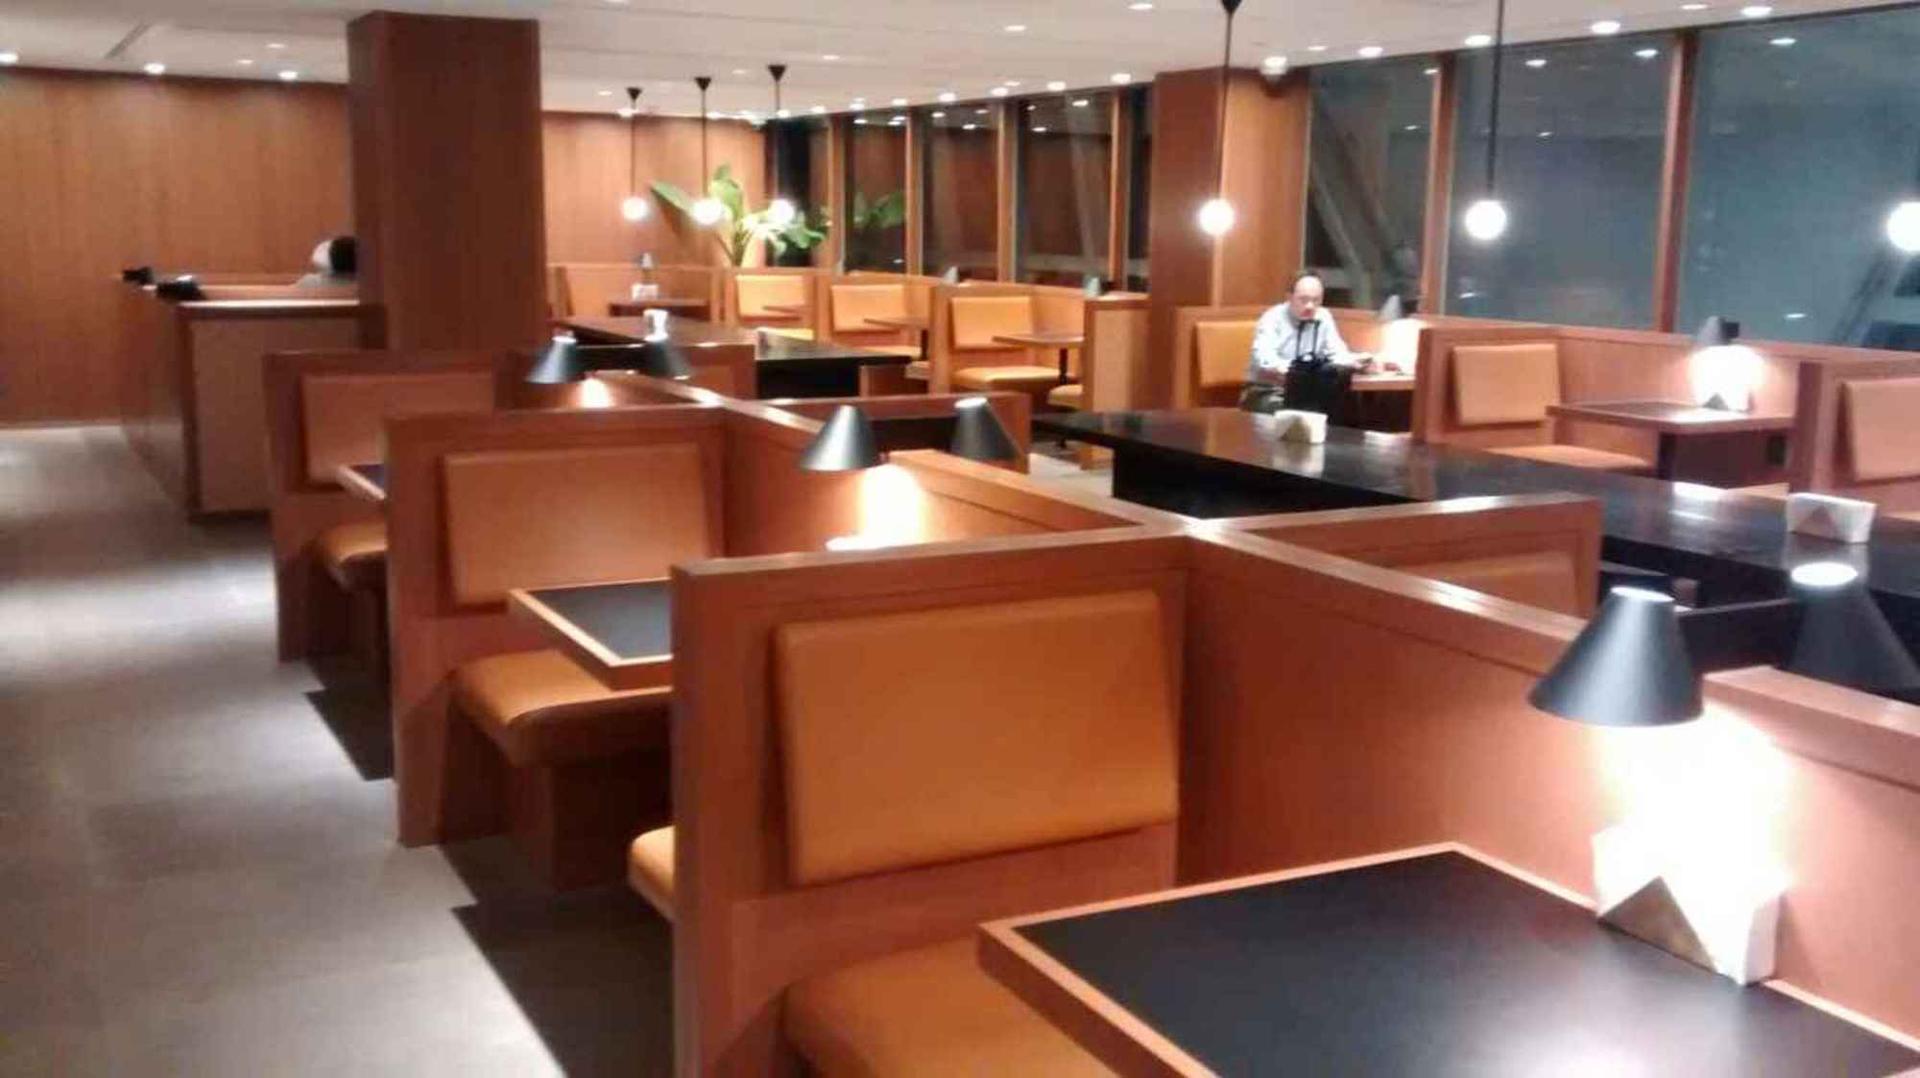 Cathay Pacific First and Business Class Lounge image 23 of 69